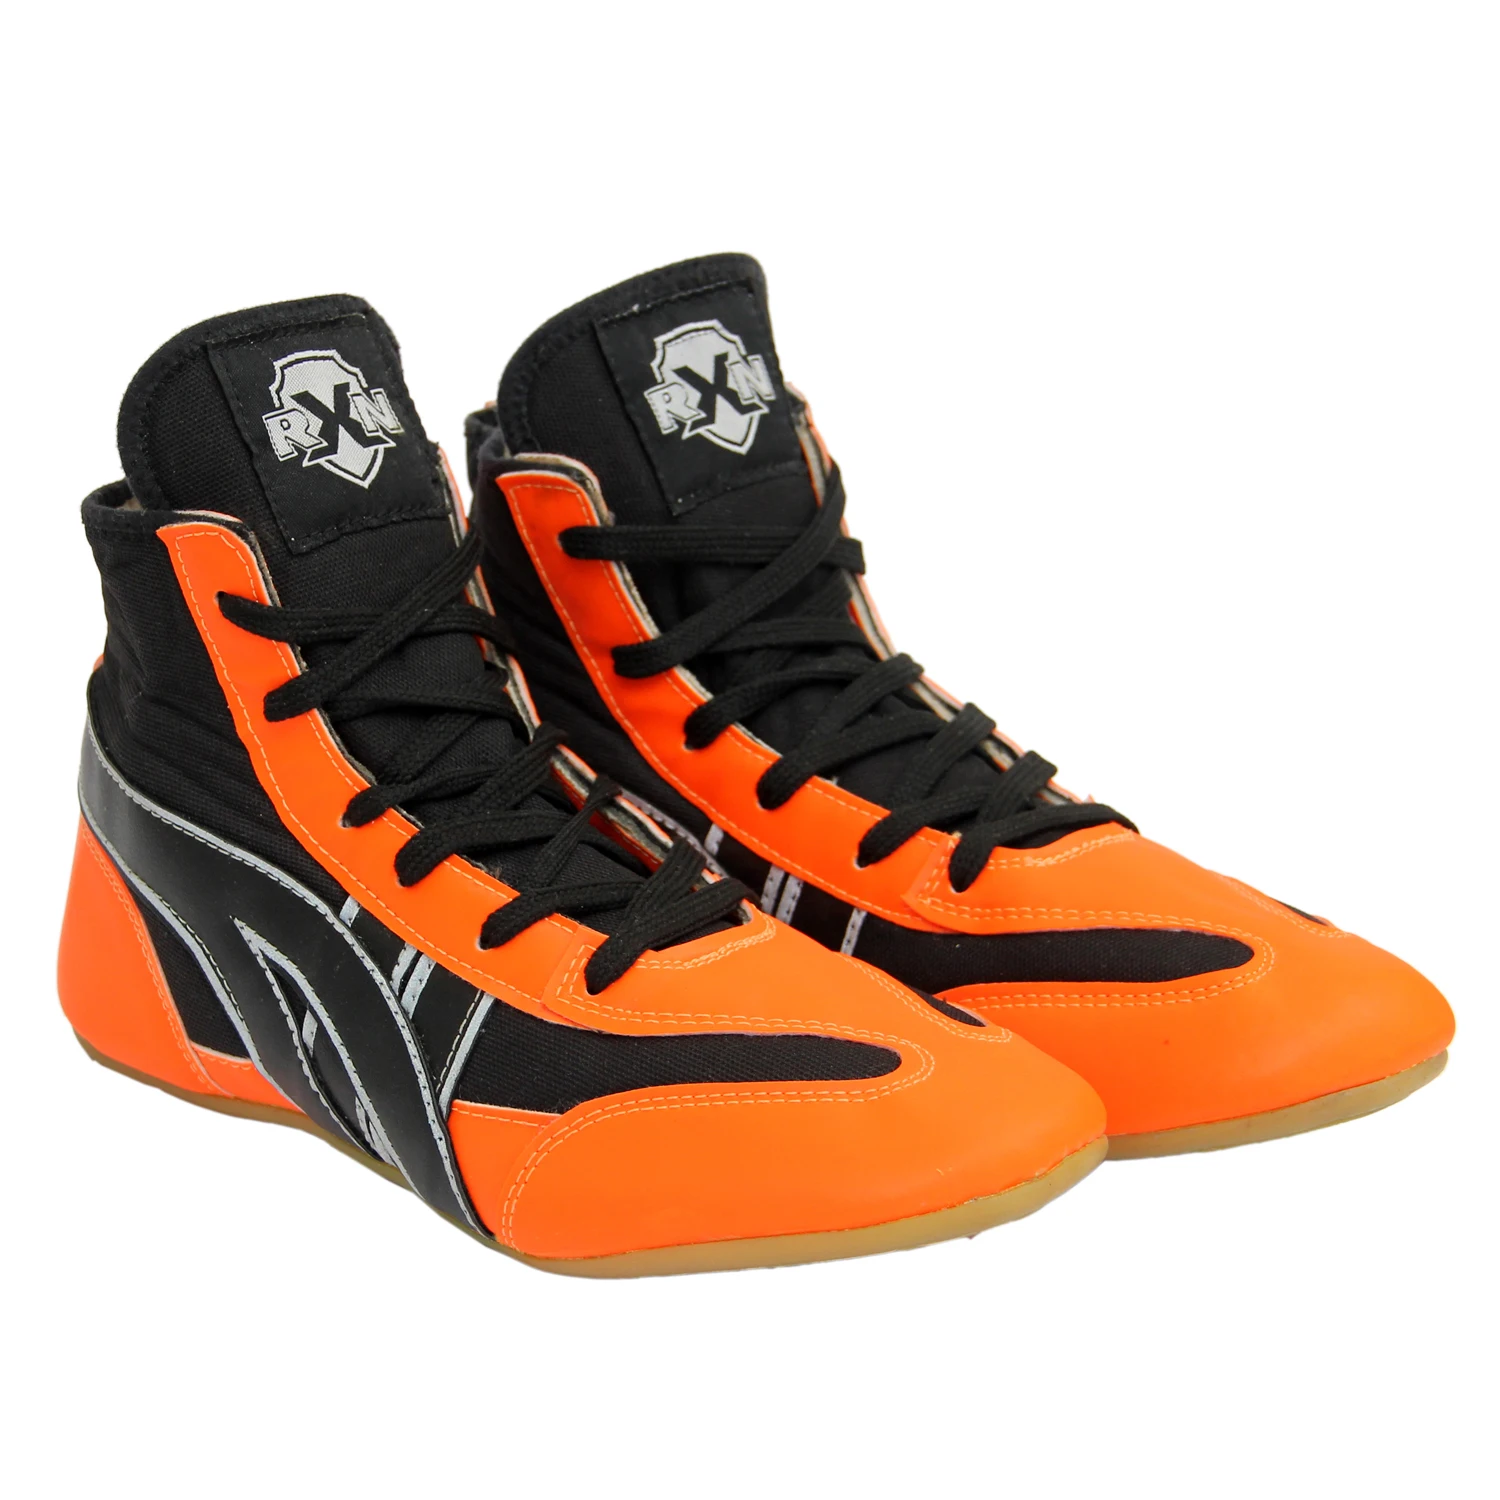 Rxn Latest Modal Wrestling Shoes For 